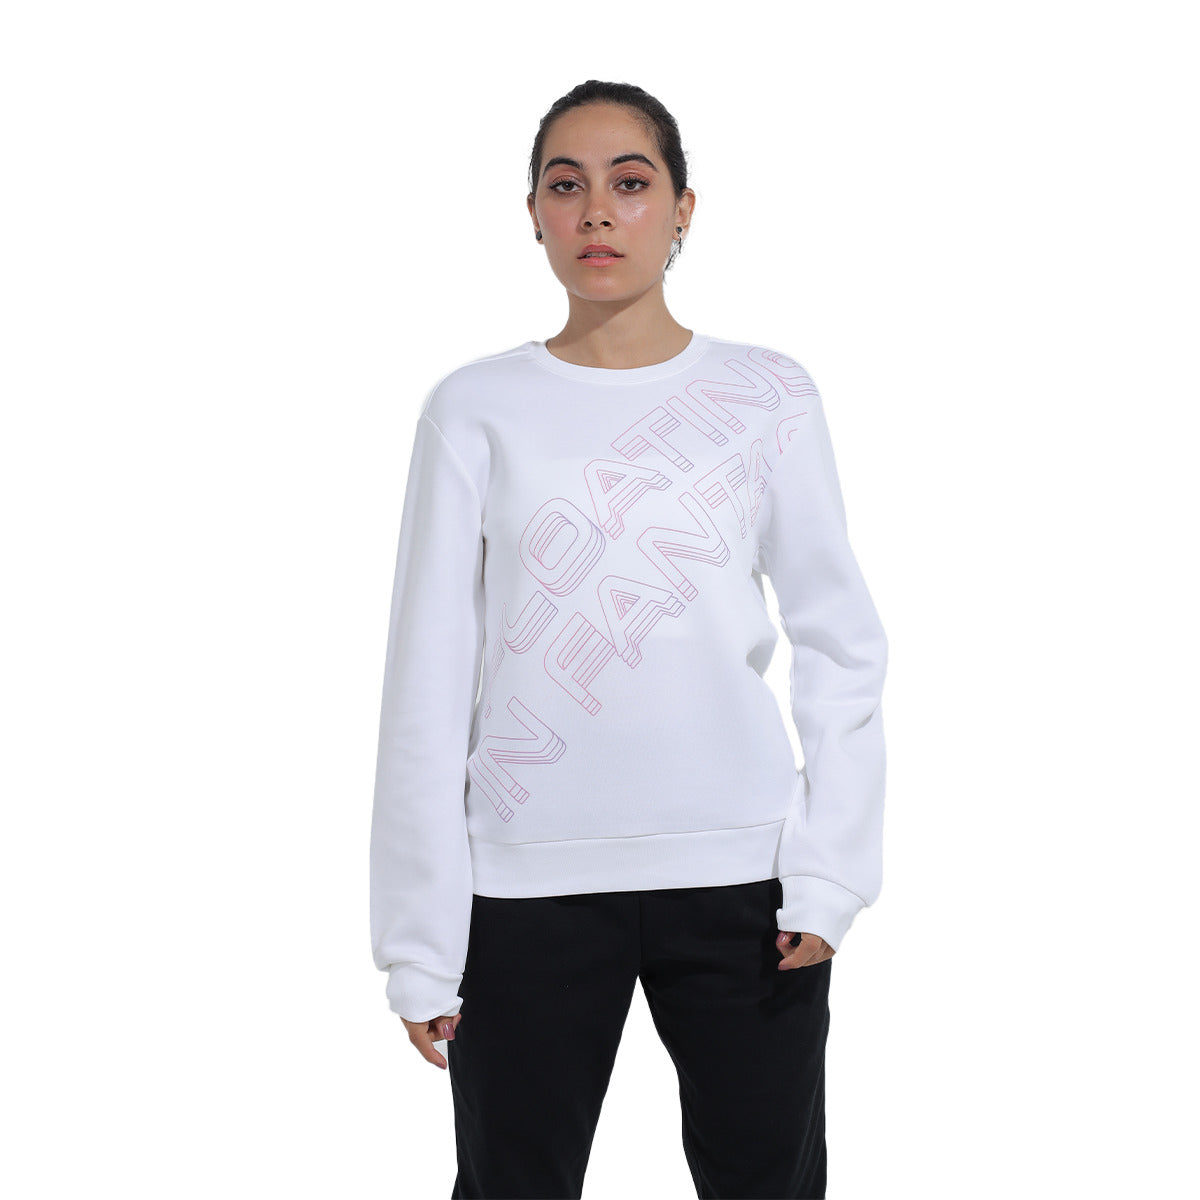 Anta Sweatshirt with Long Sleeves For Women, White